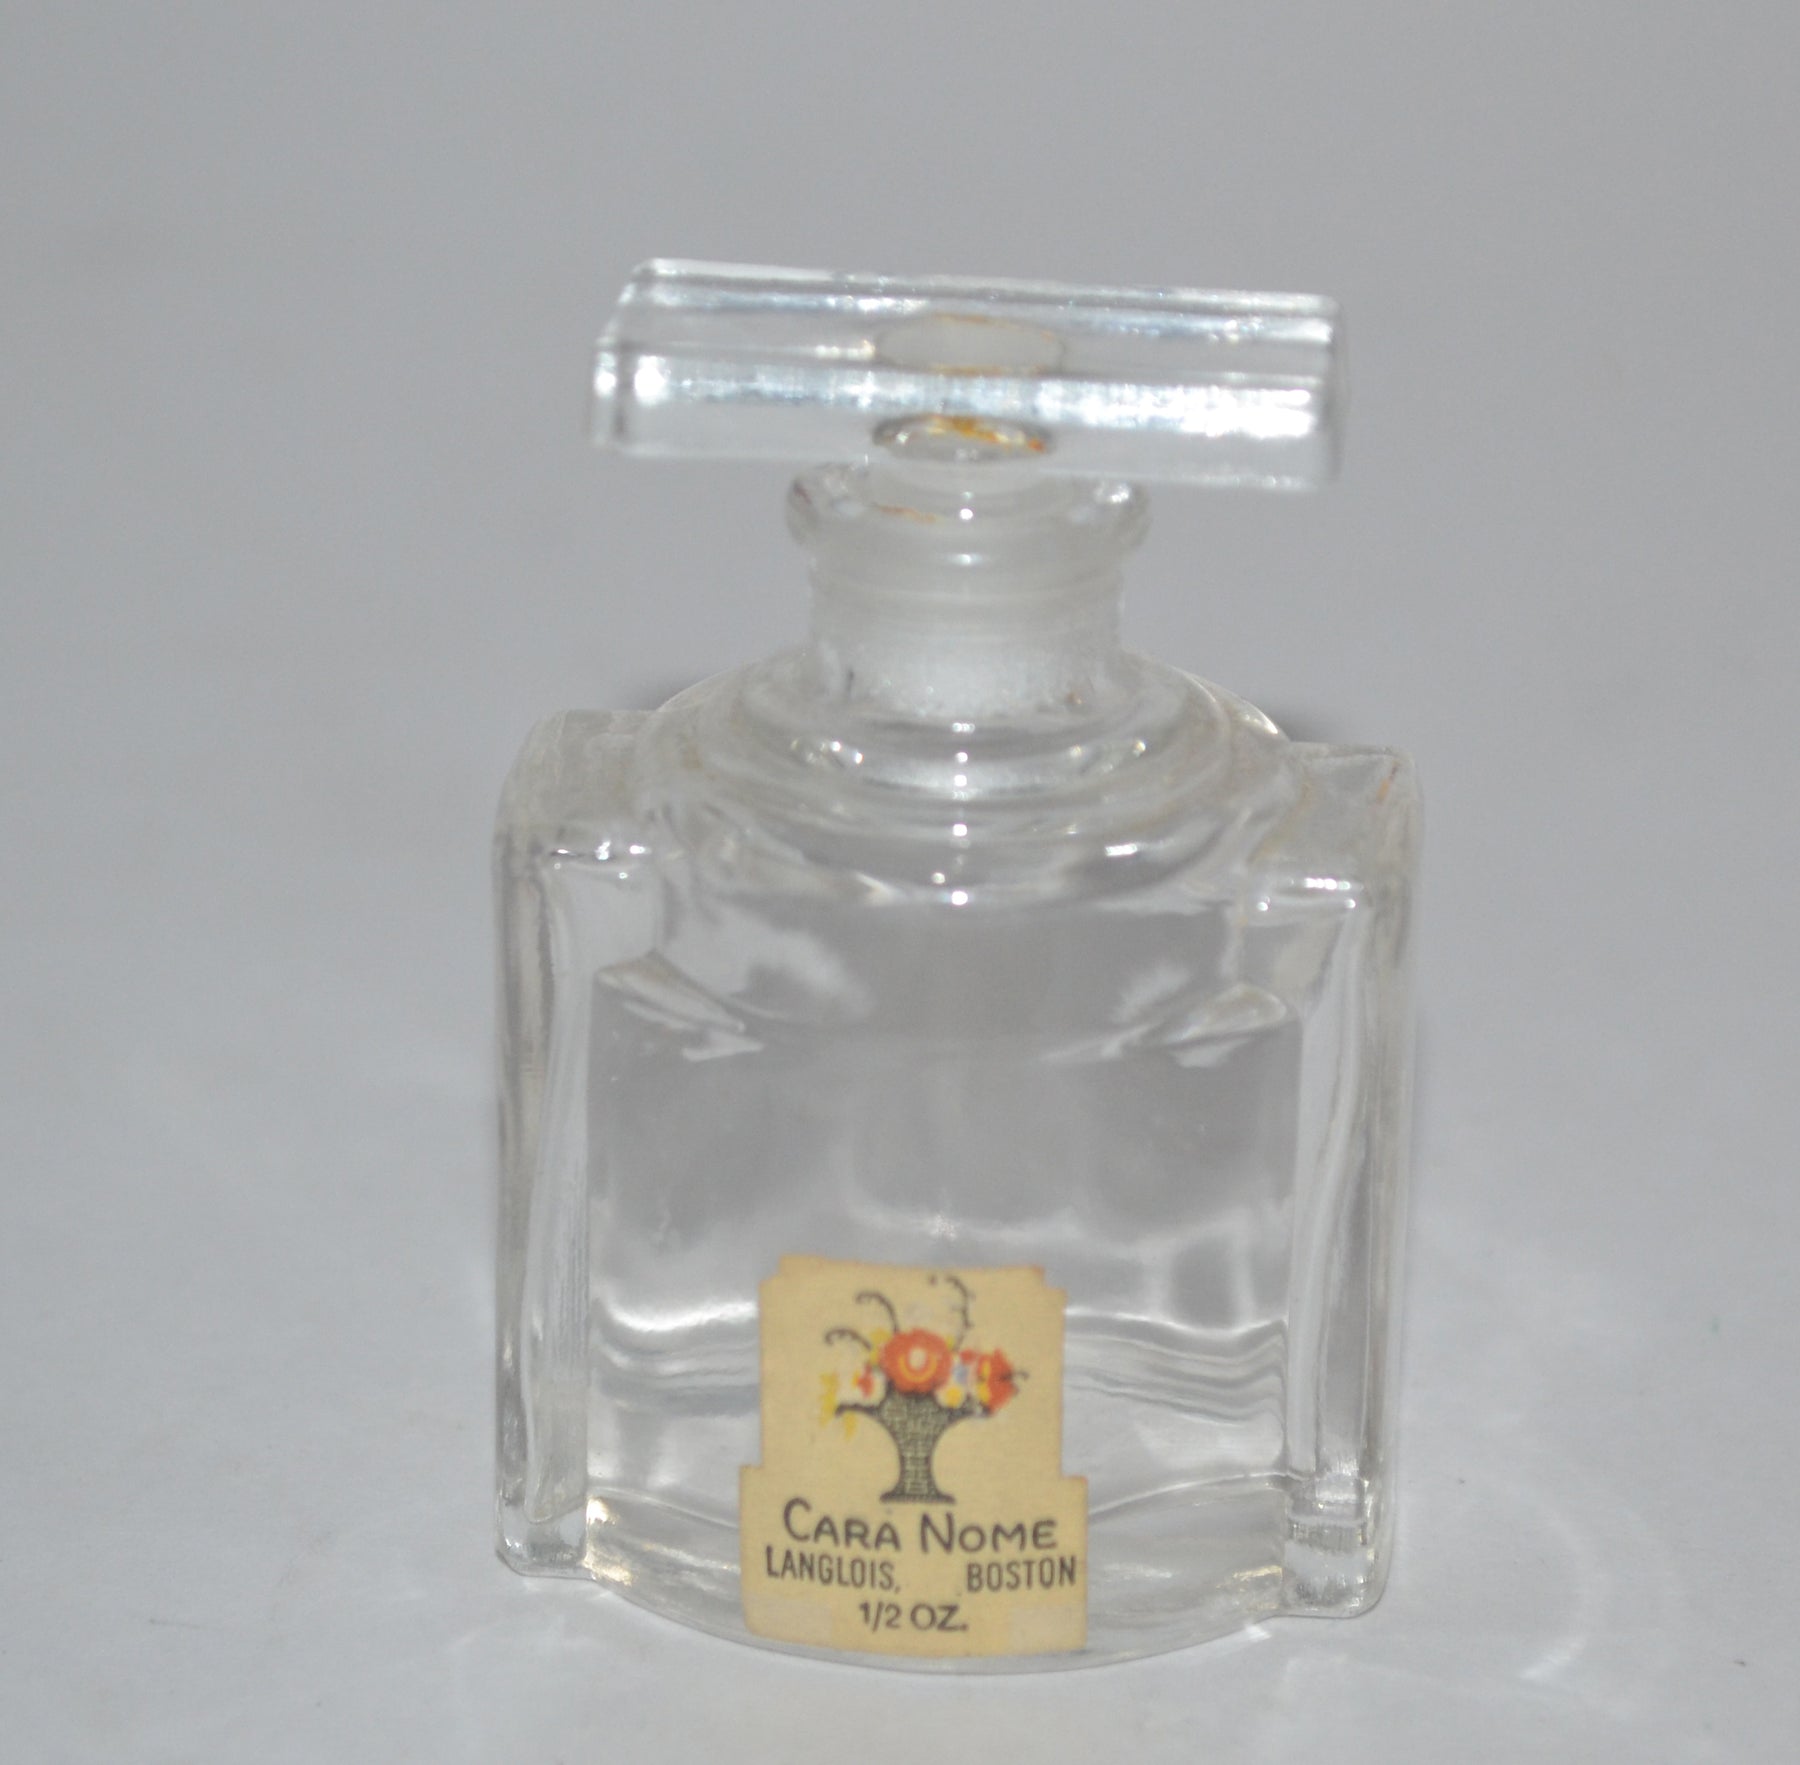 Vintage Langlois Perfume By Cara Nome – Quirky Finds